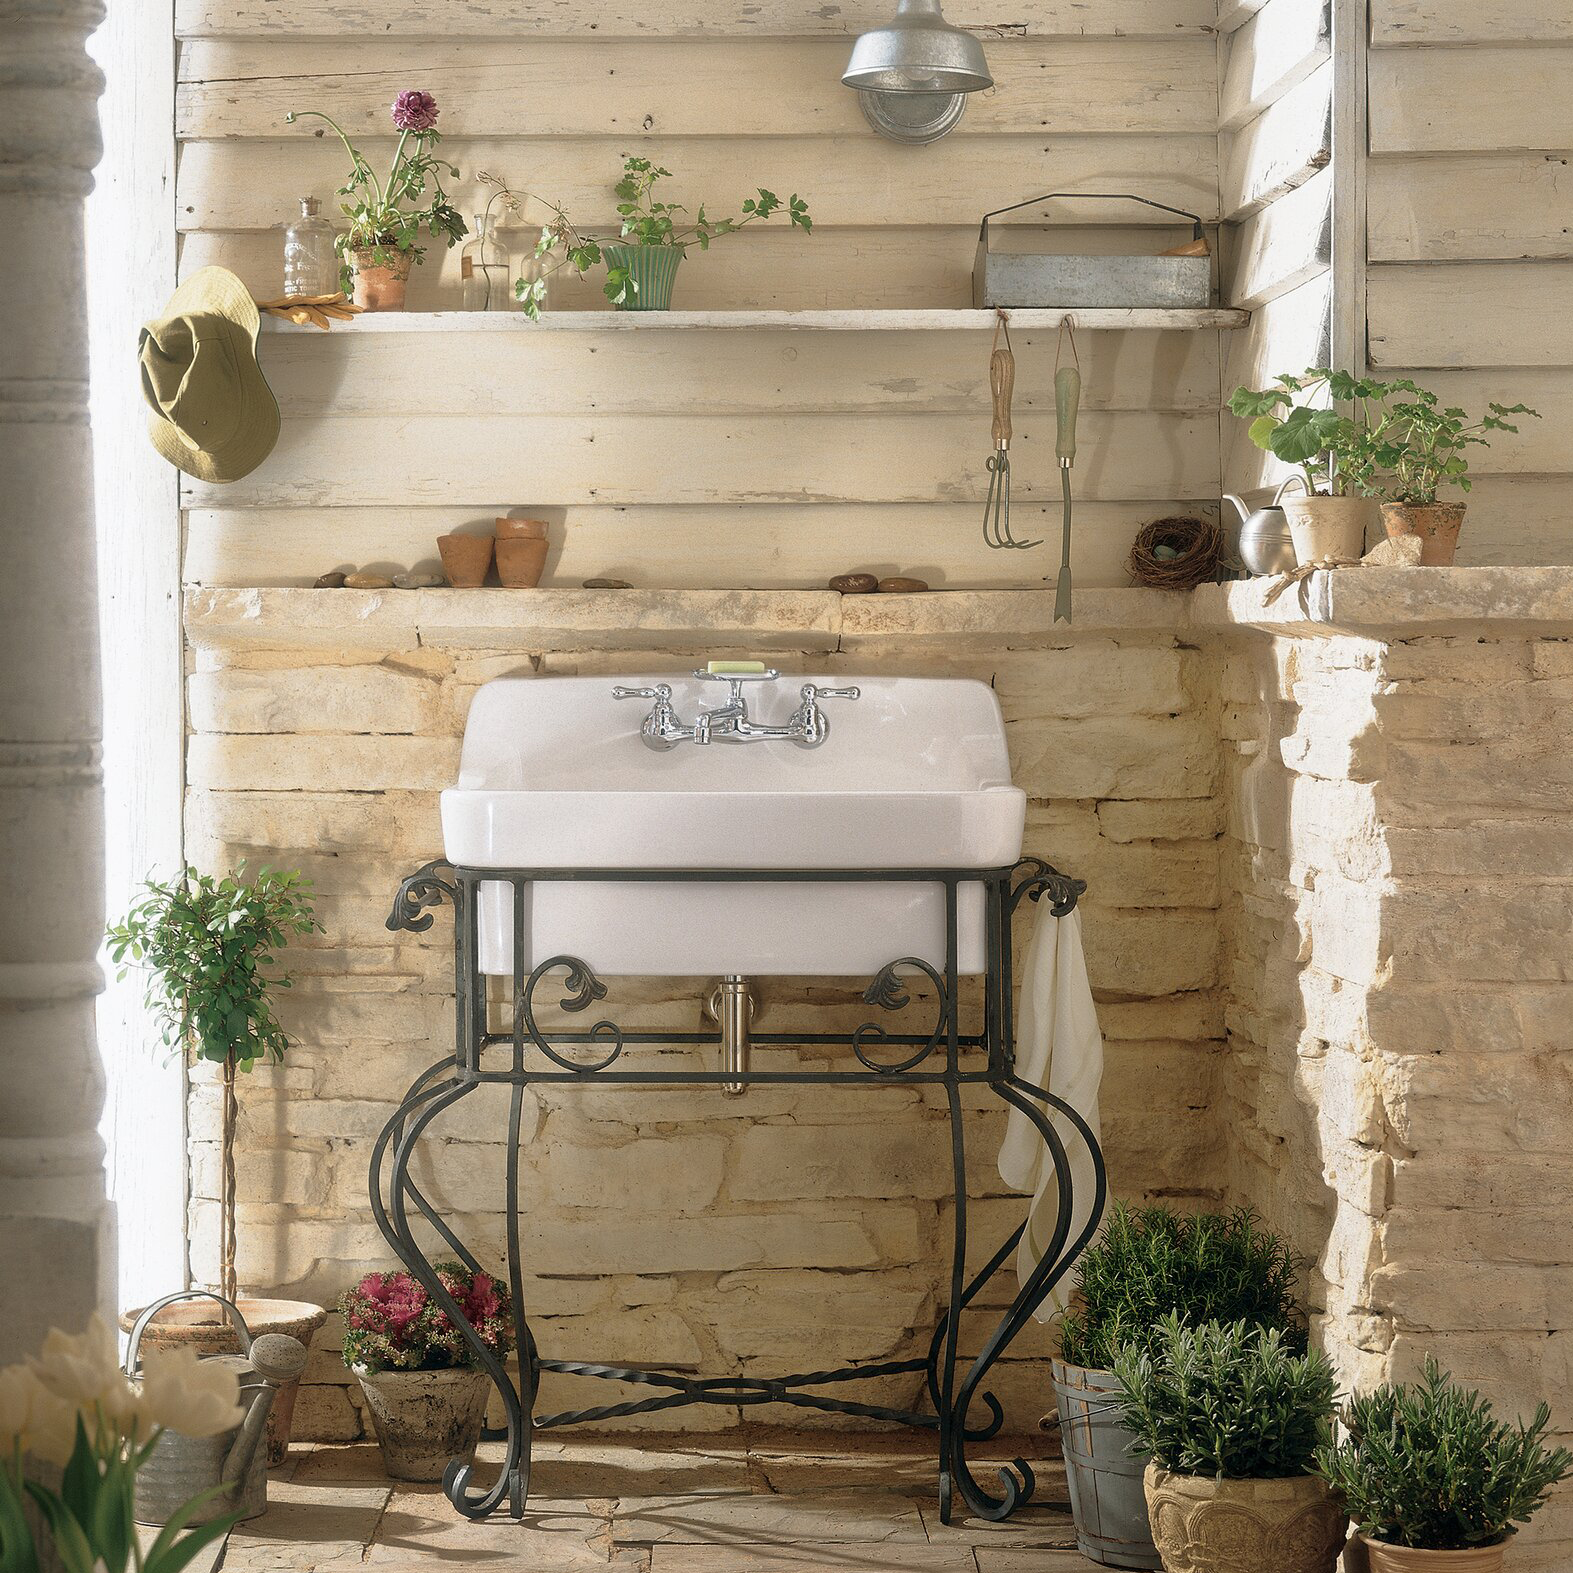 UPC Ceramic Utility sink Wall mount Farmhouse Apron Front Country Kitchen Sink with 8-Inch Centers laundry sink